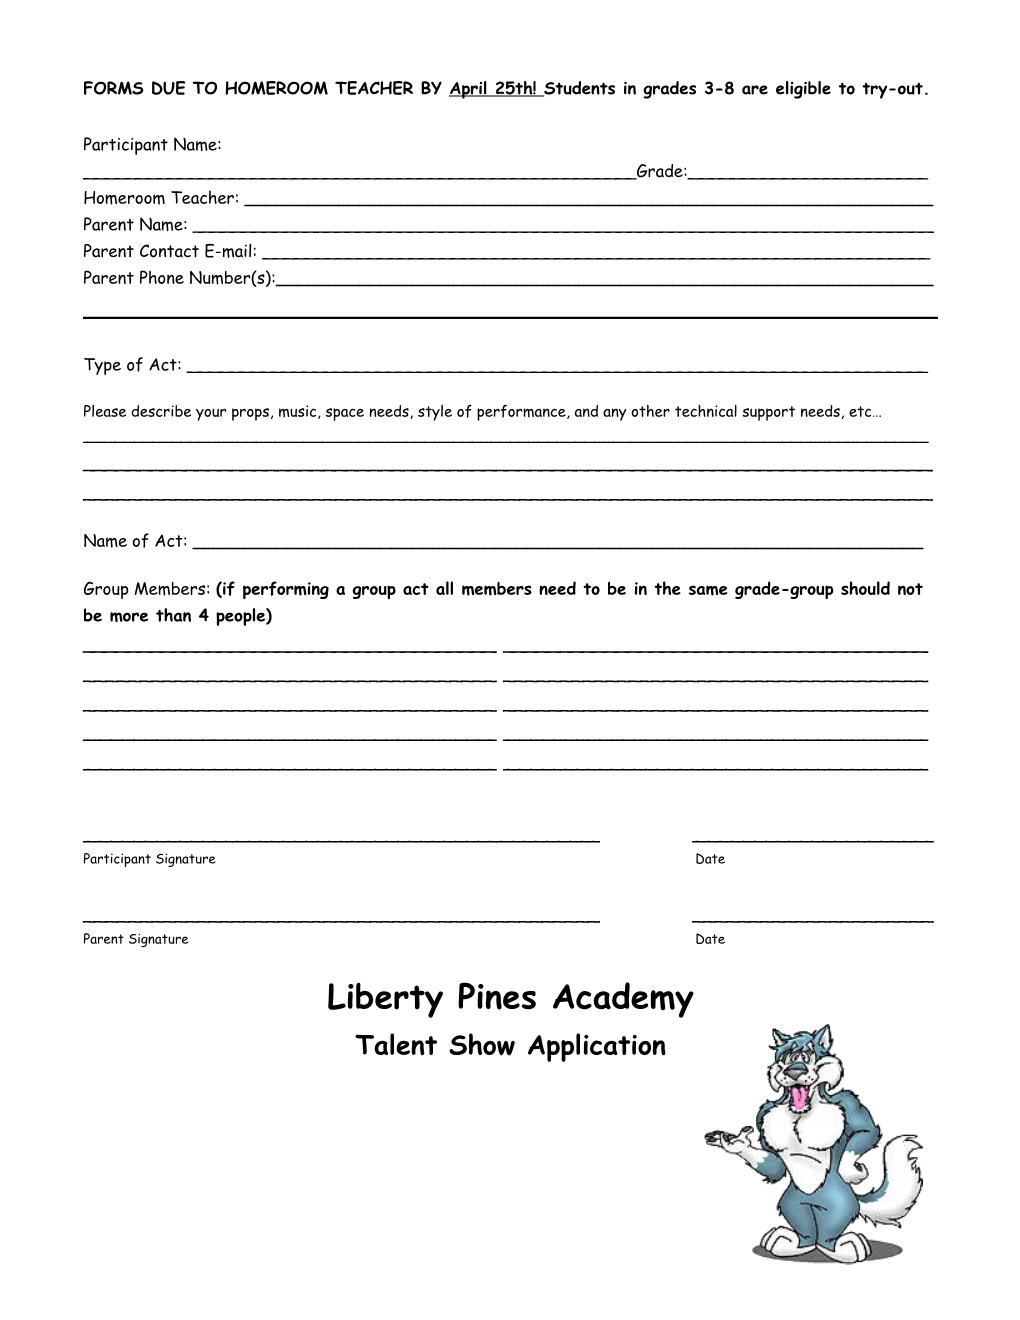 FORMS DUE to HOMEROOM TEACHER by April 25Th! Students in Grades 3-8 Are Eligible to Try-Out